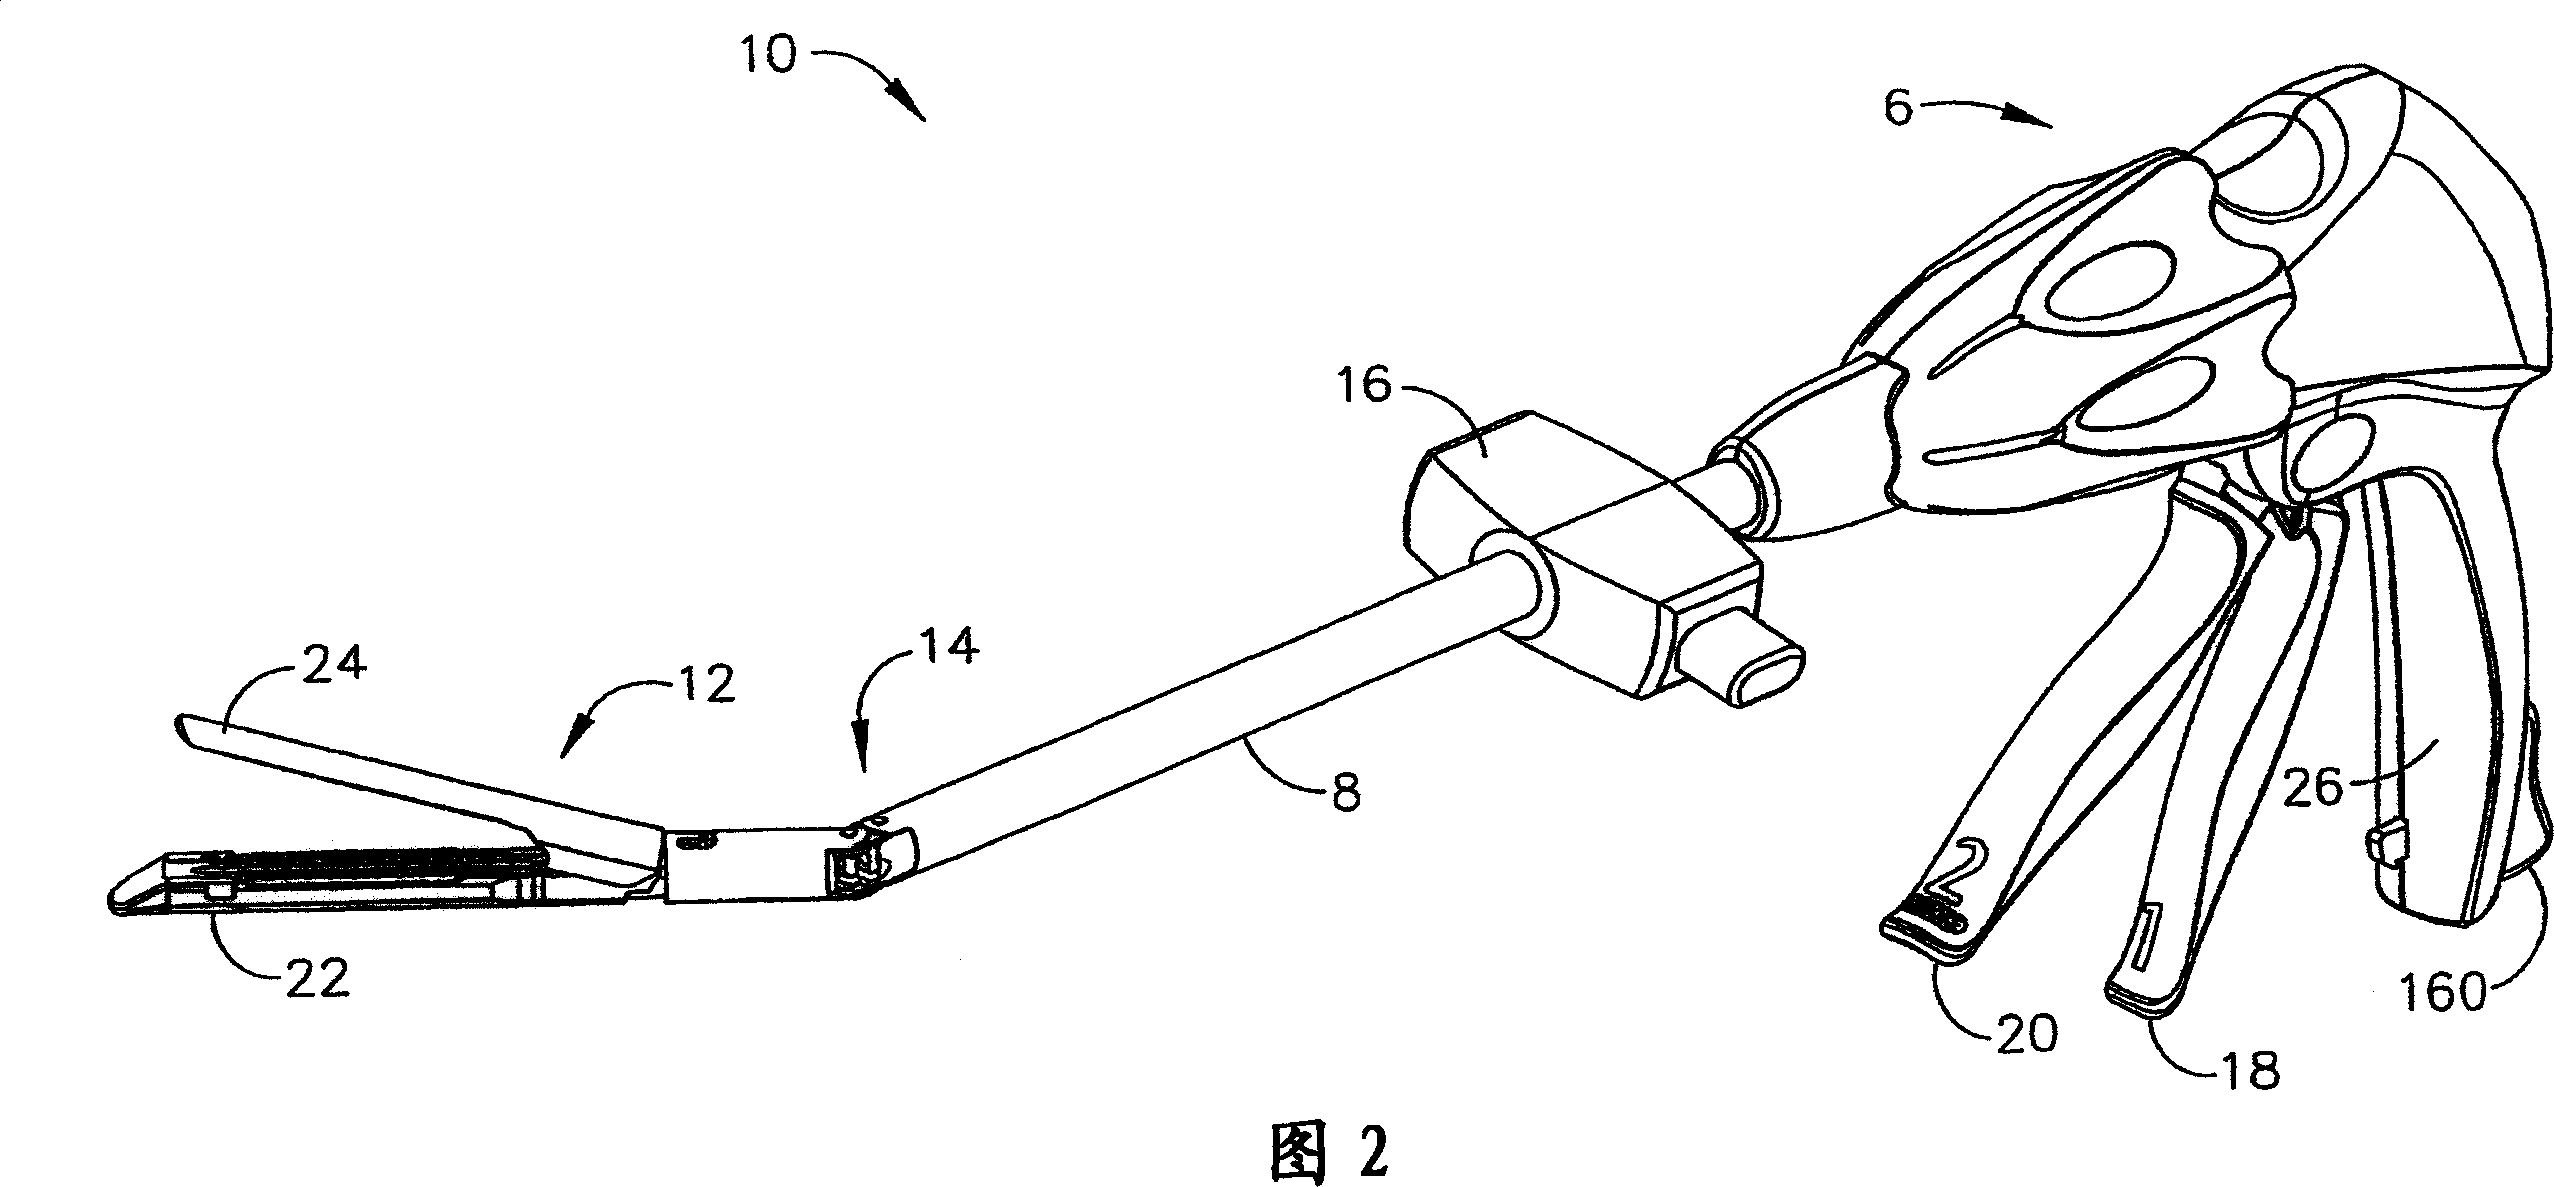 Surgical instrument having a removable battery